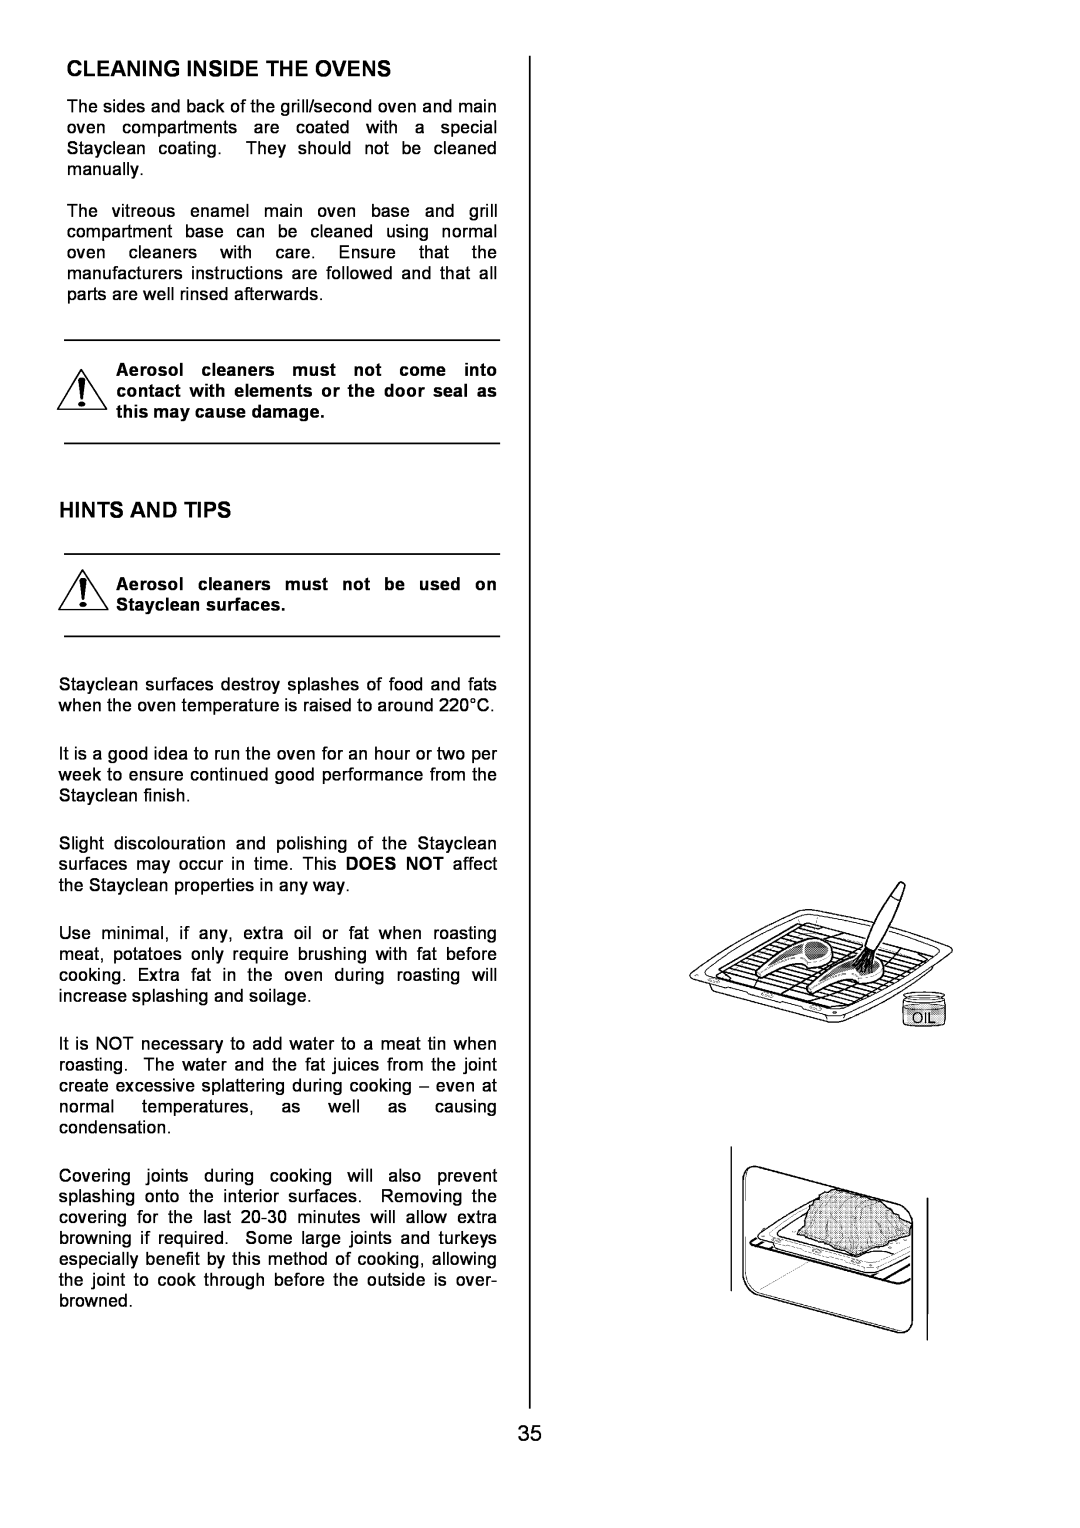 AEG 311704300, U7101-4 manual Cleaning Inside The Ovens, Hints And Tips 